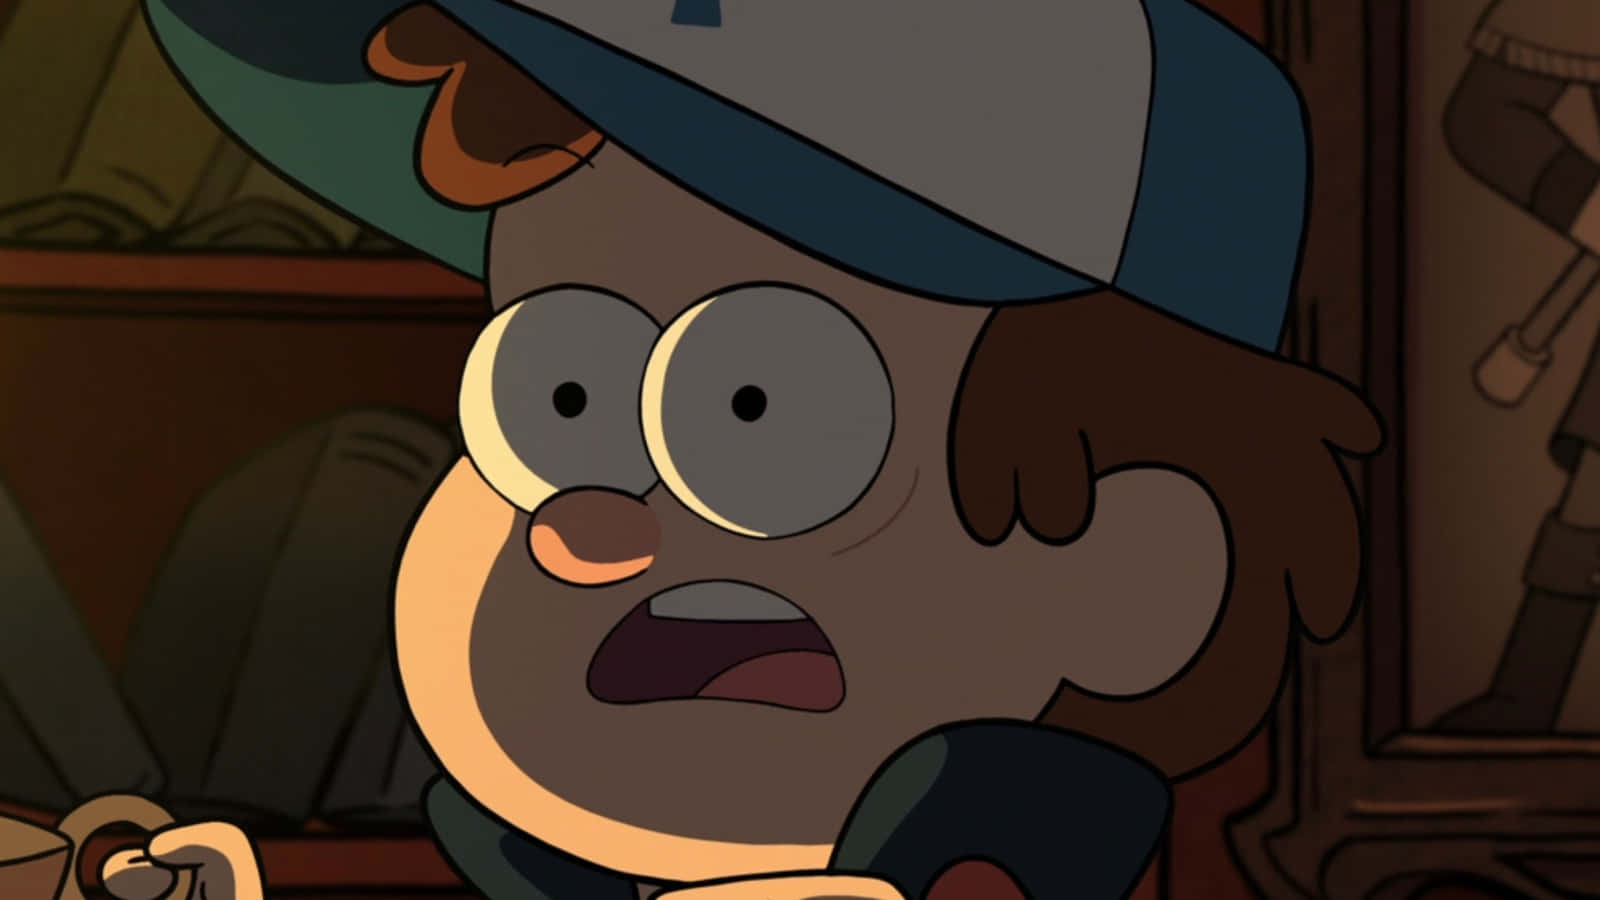 Follow Dipper and Mabel on their adventures in Gravity Falls